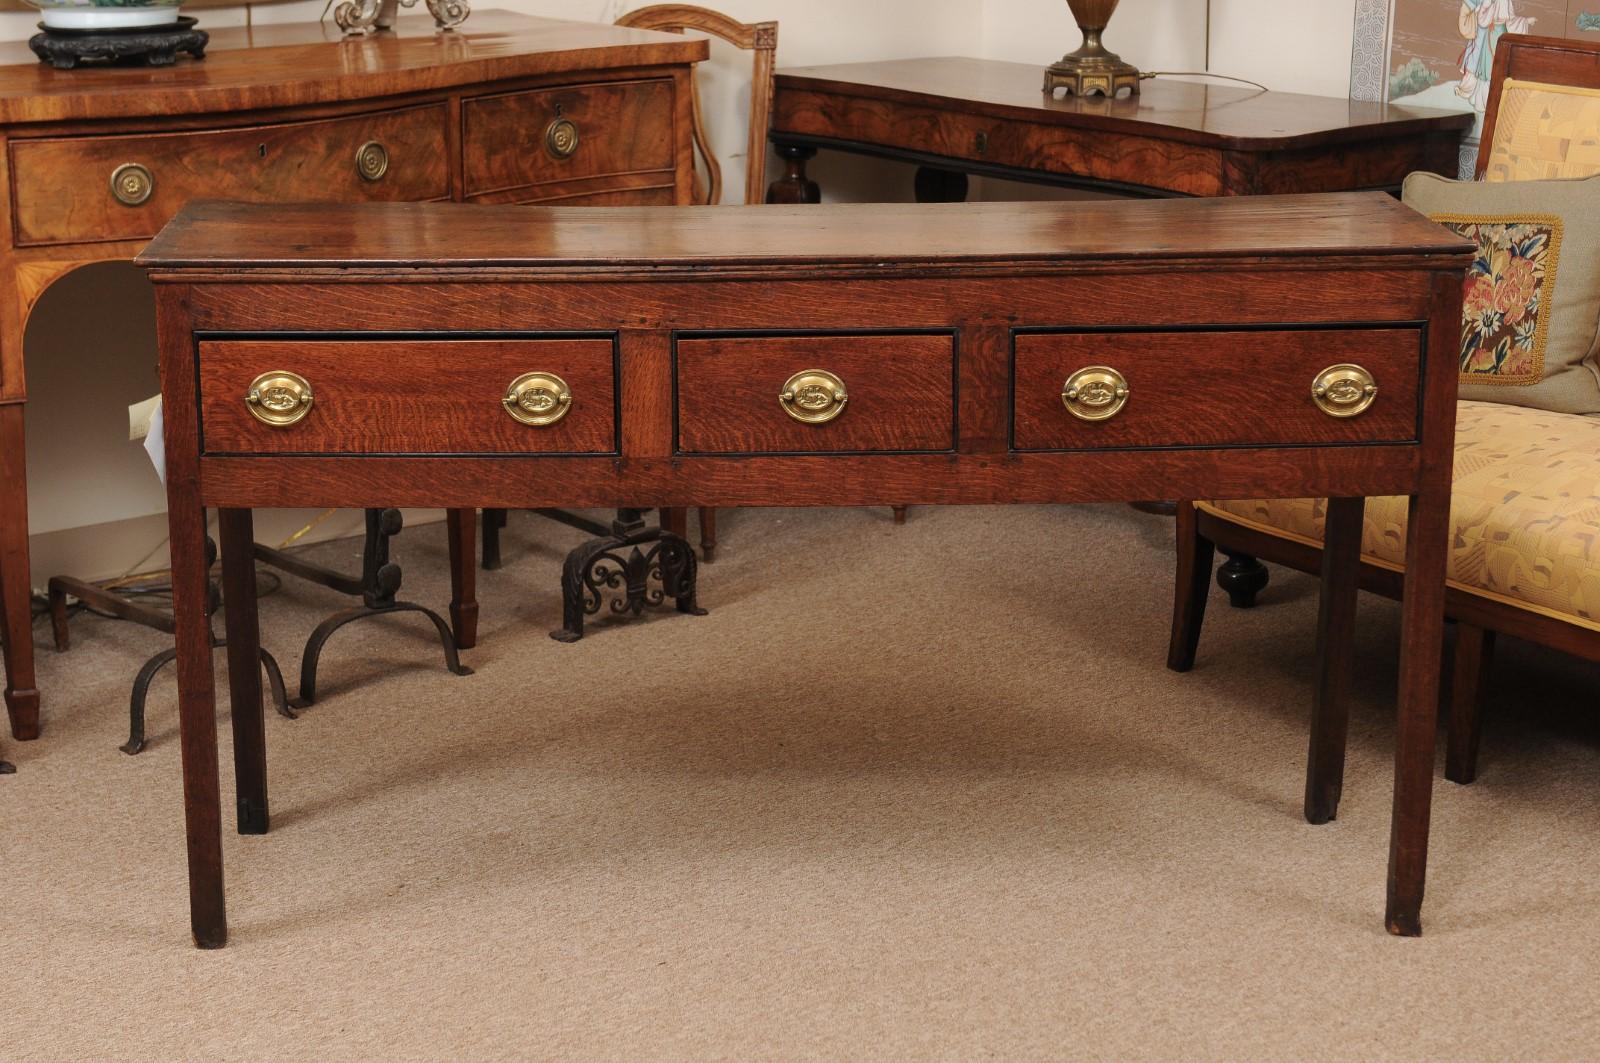 An early 19th century English oak dresser base/server featuring 3 drawers with brass pulls and square legs.